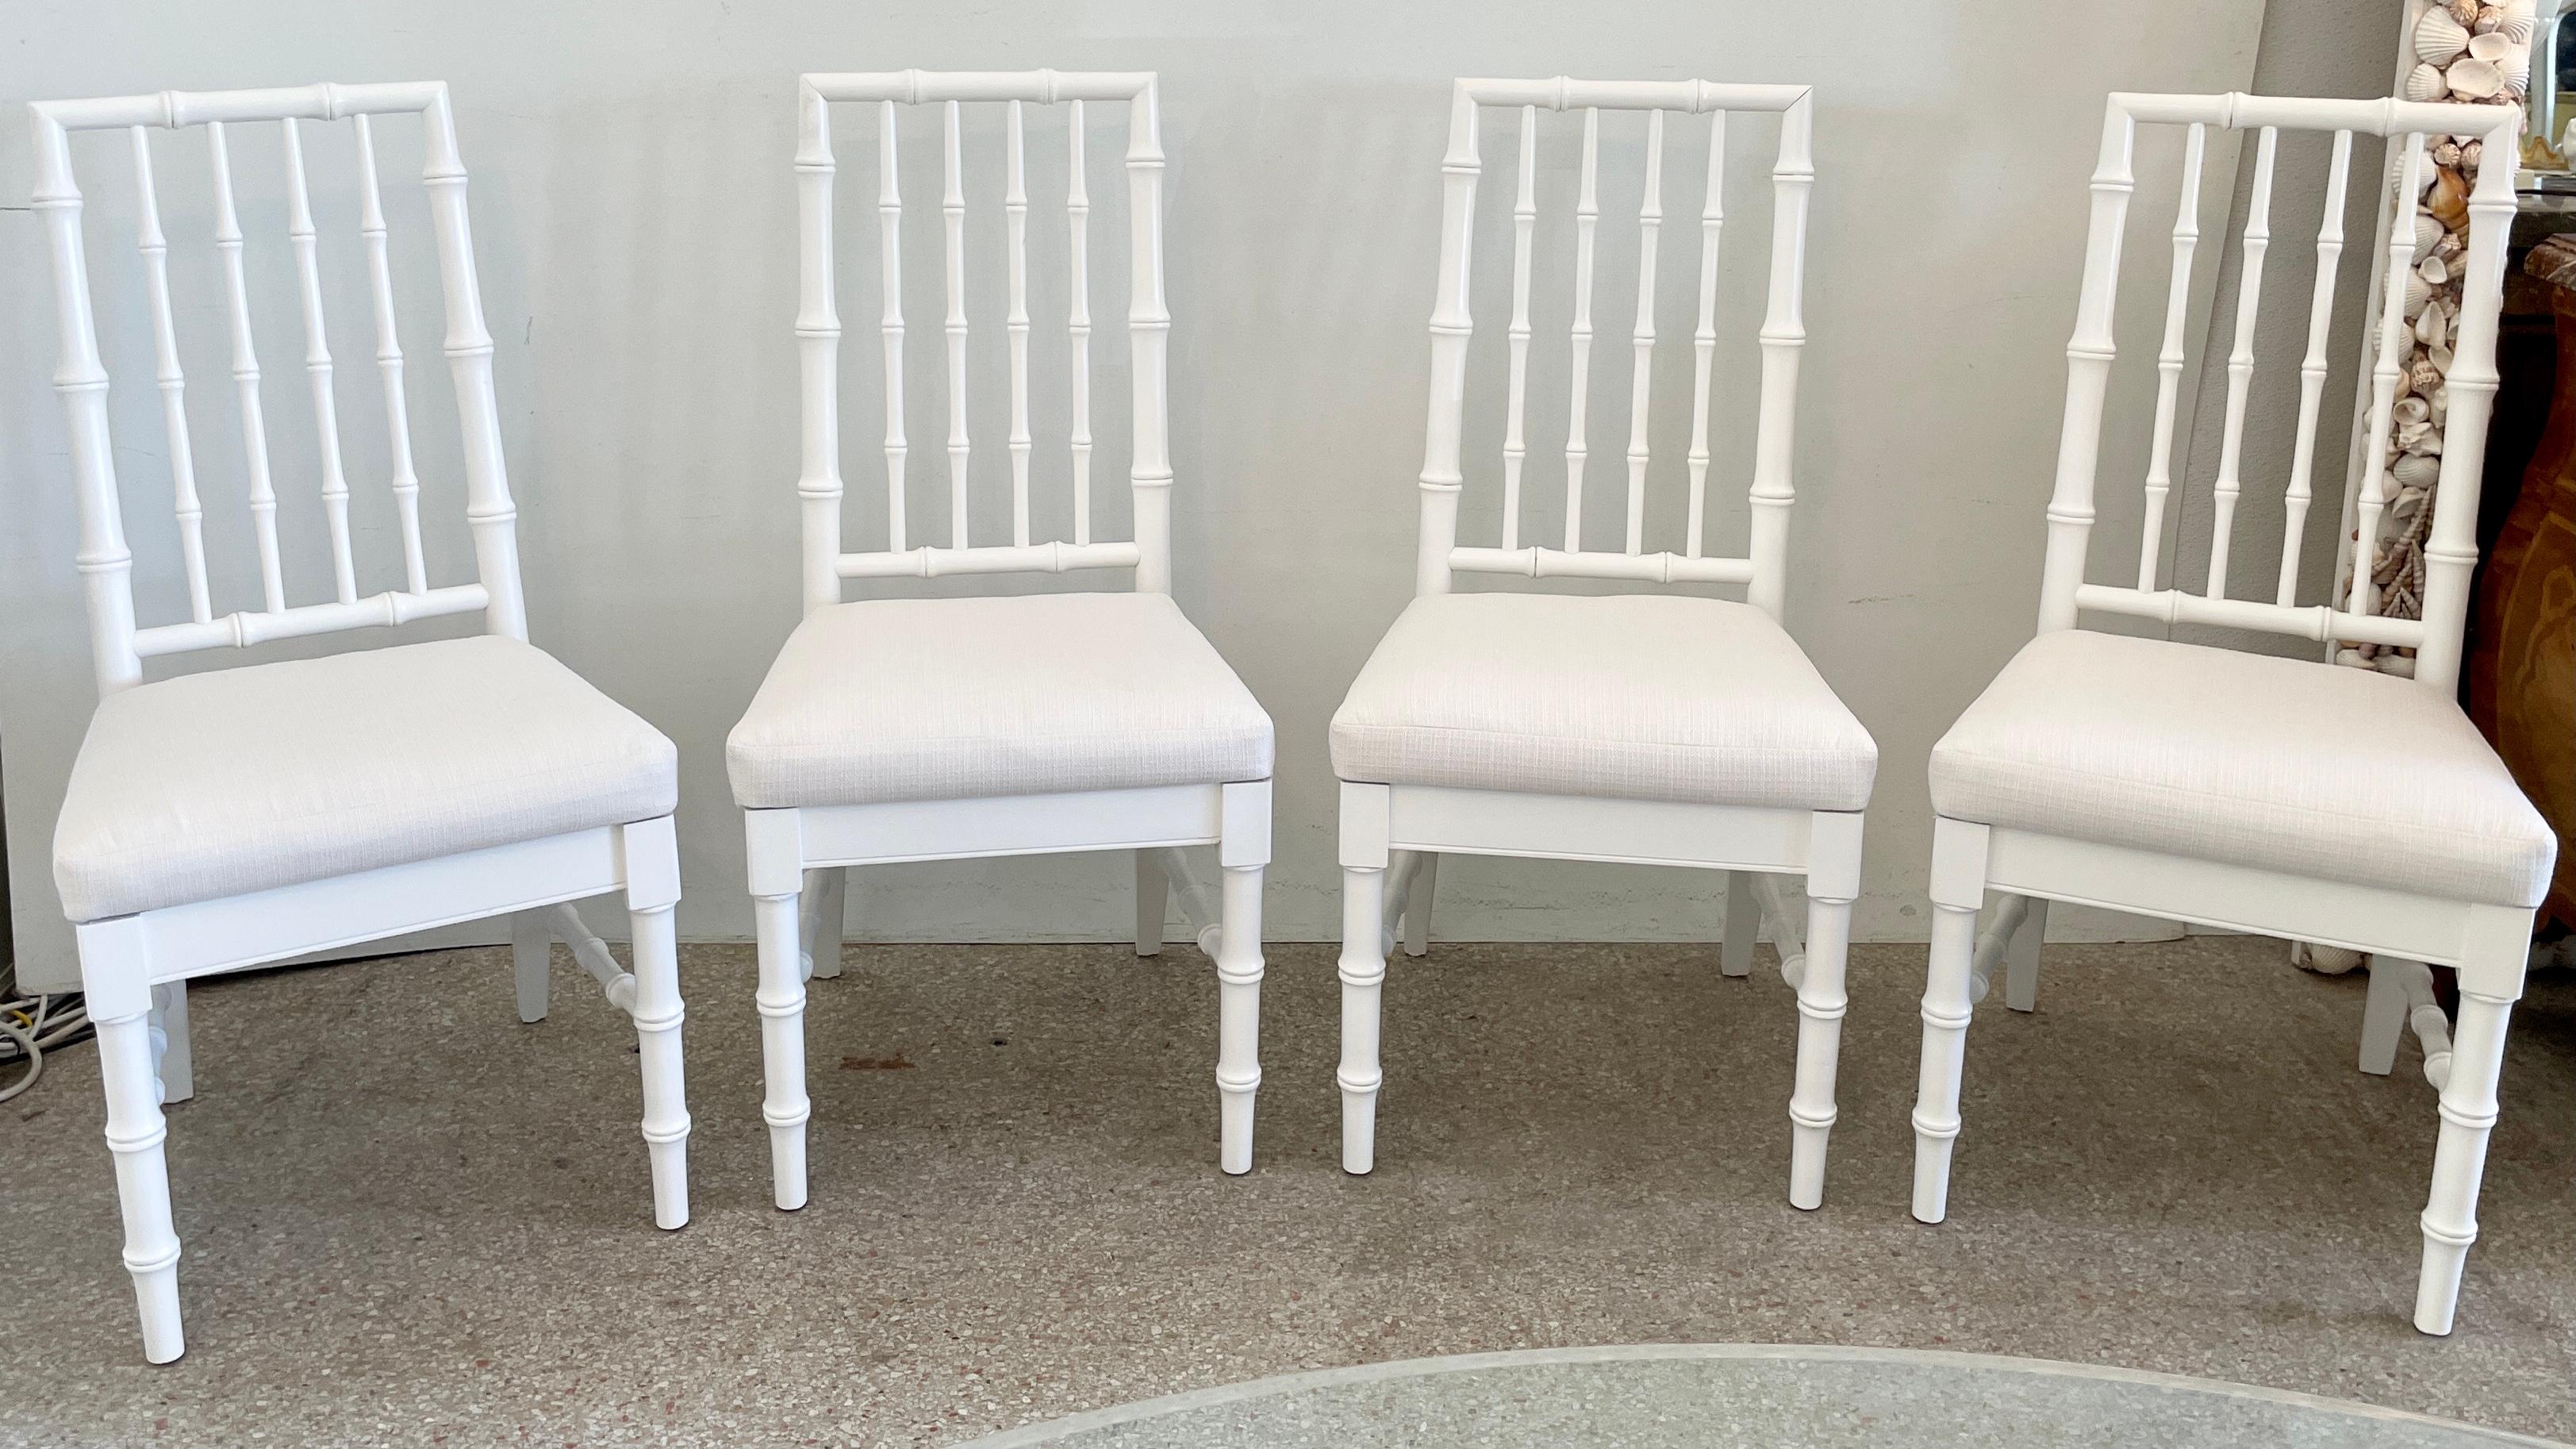 Fabulous set of four faux bamboo dining chairs in white lacquer and Todd Hase High Performance textiles. New cushions added and they make a great addition to your boho chic interiors. We have several matching dining tables and other chairs that go